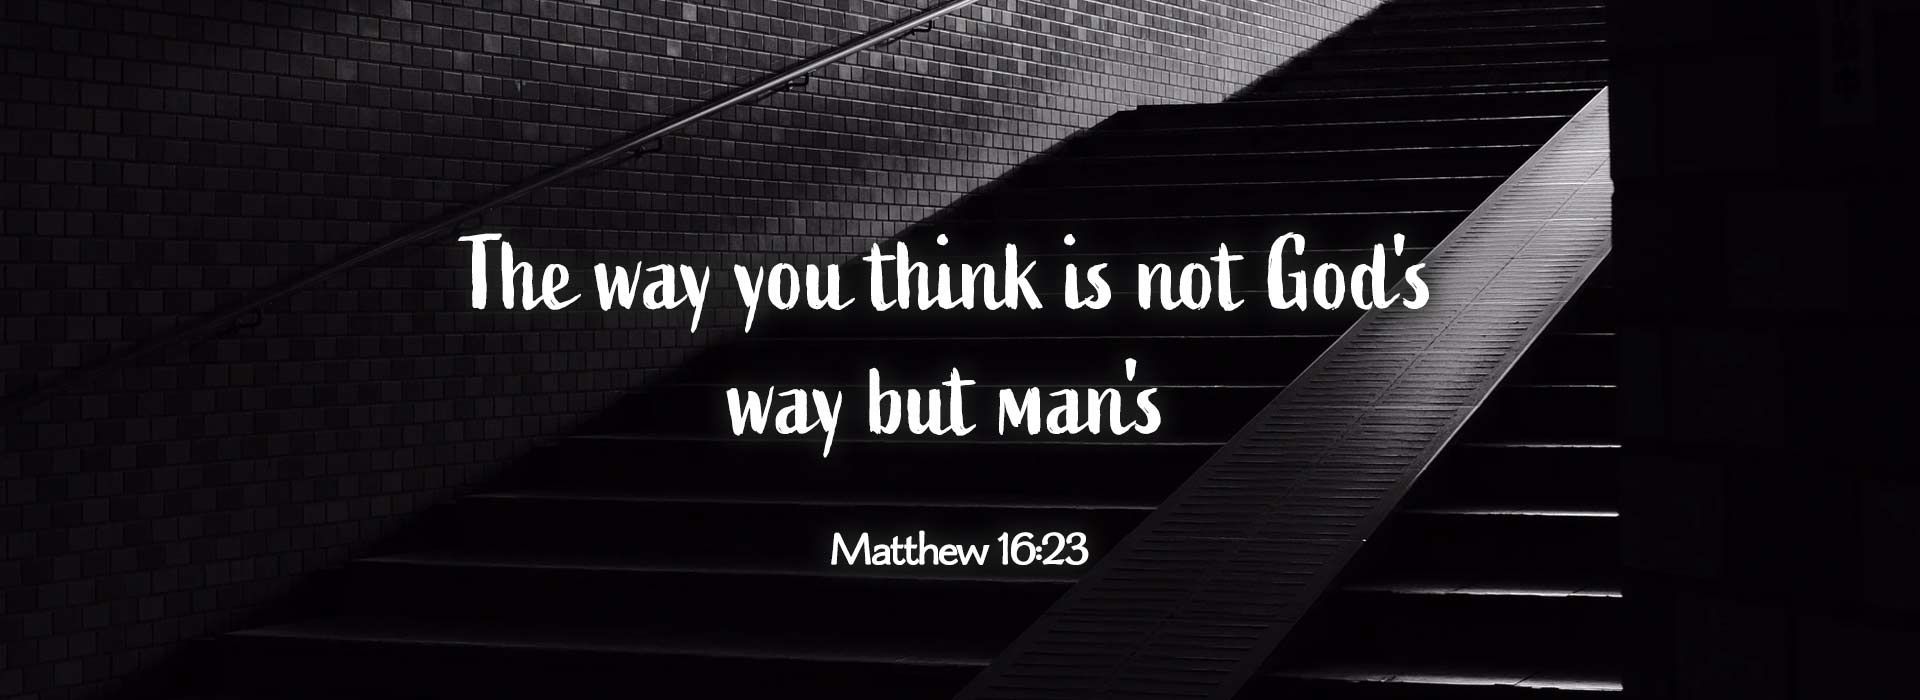 The way you think is not God's way